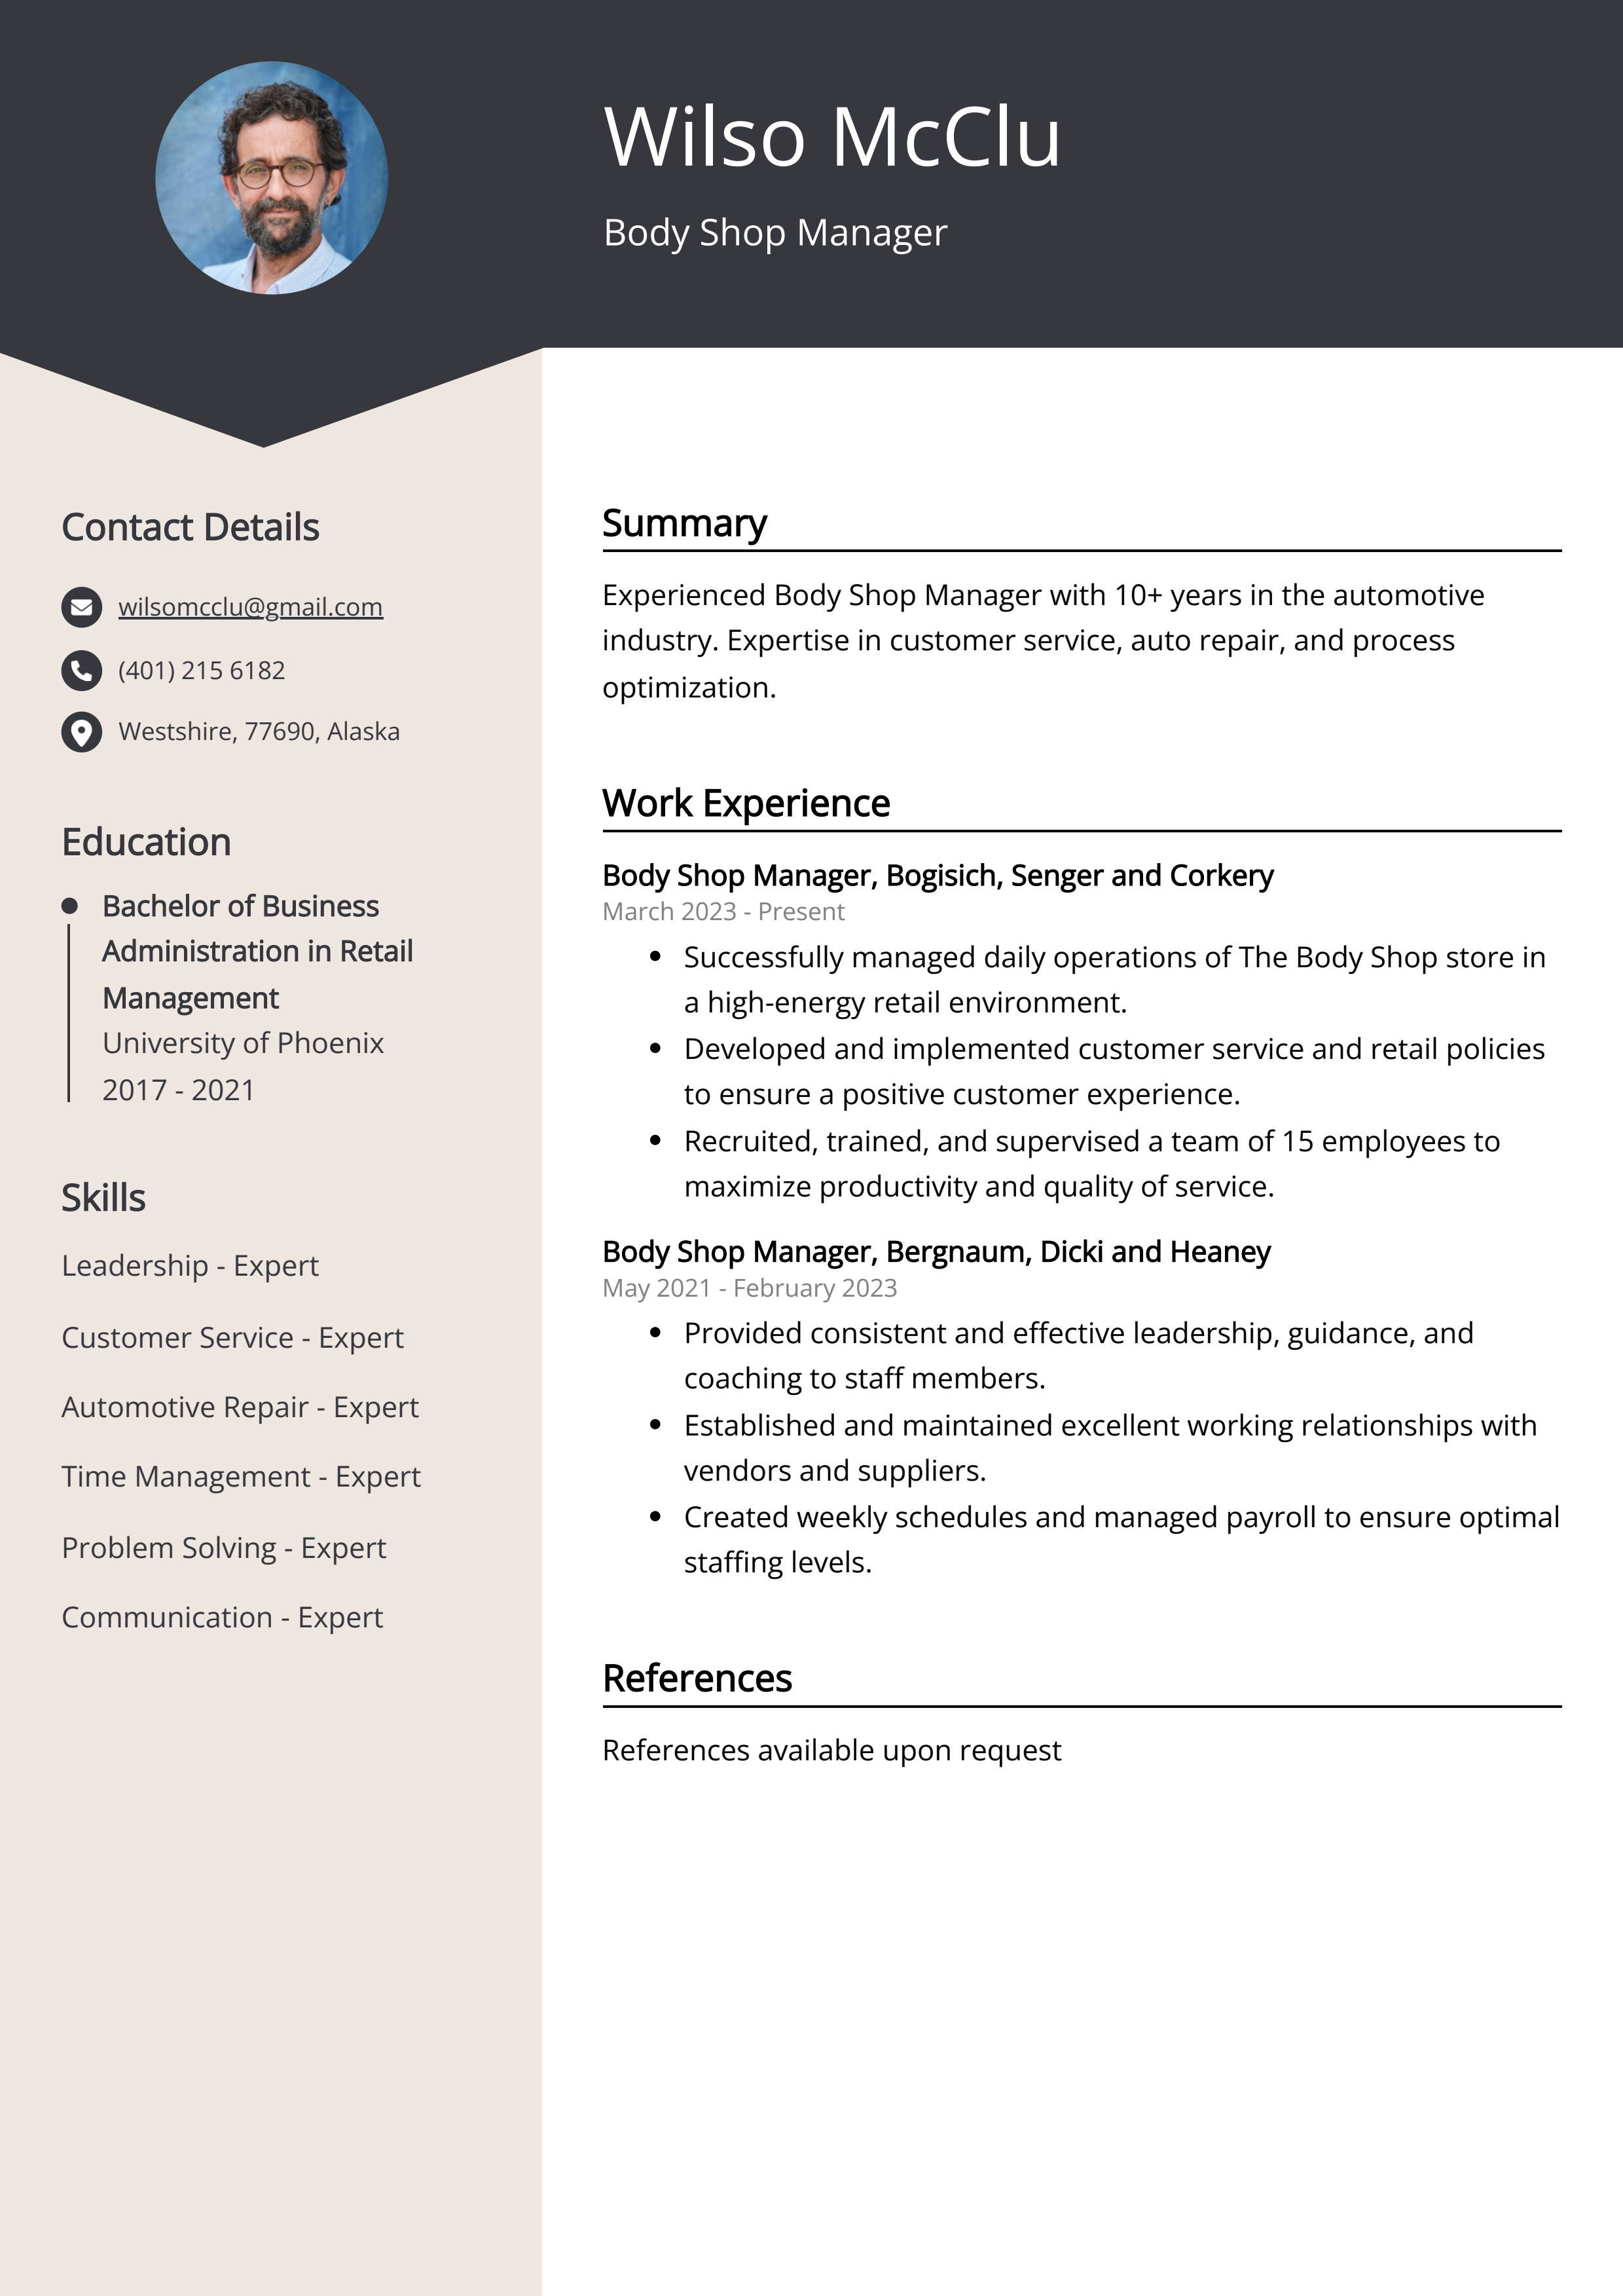 Body Shop Manager Resume Example